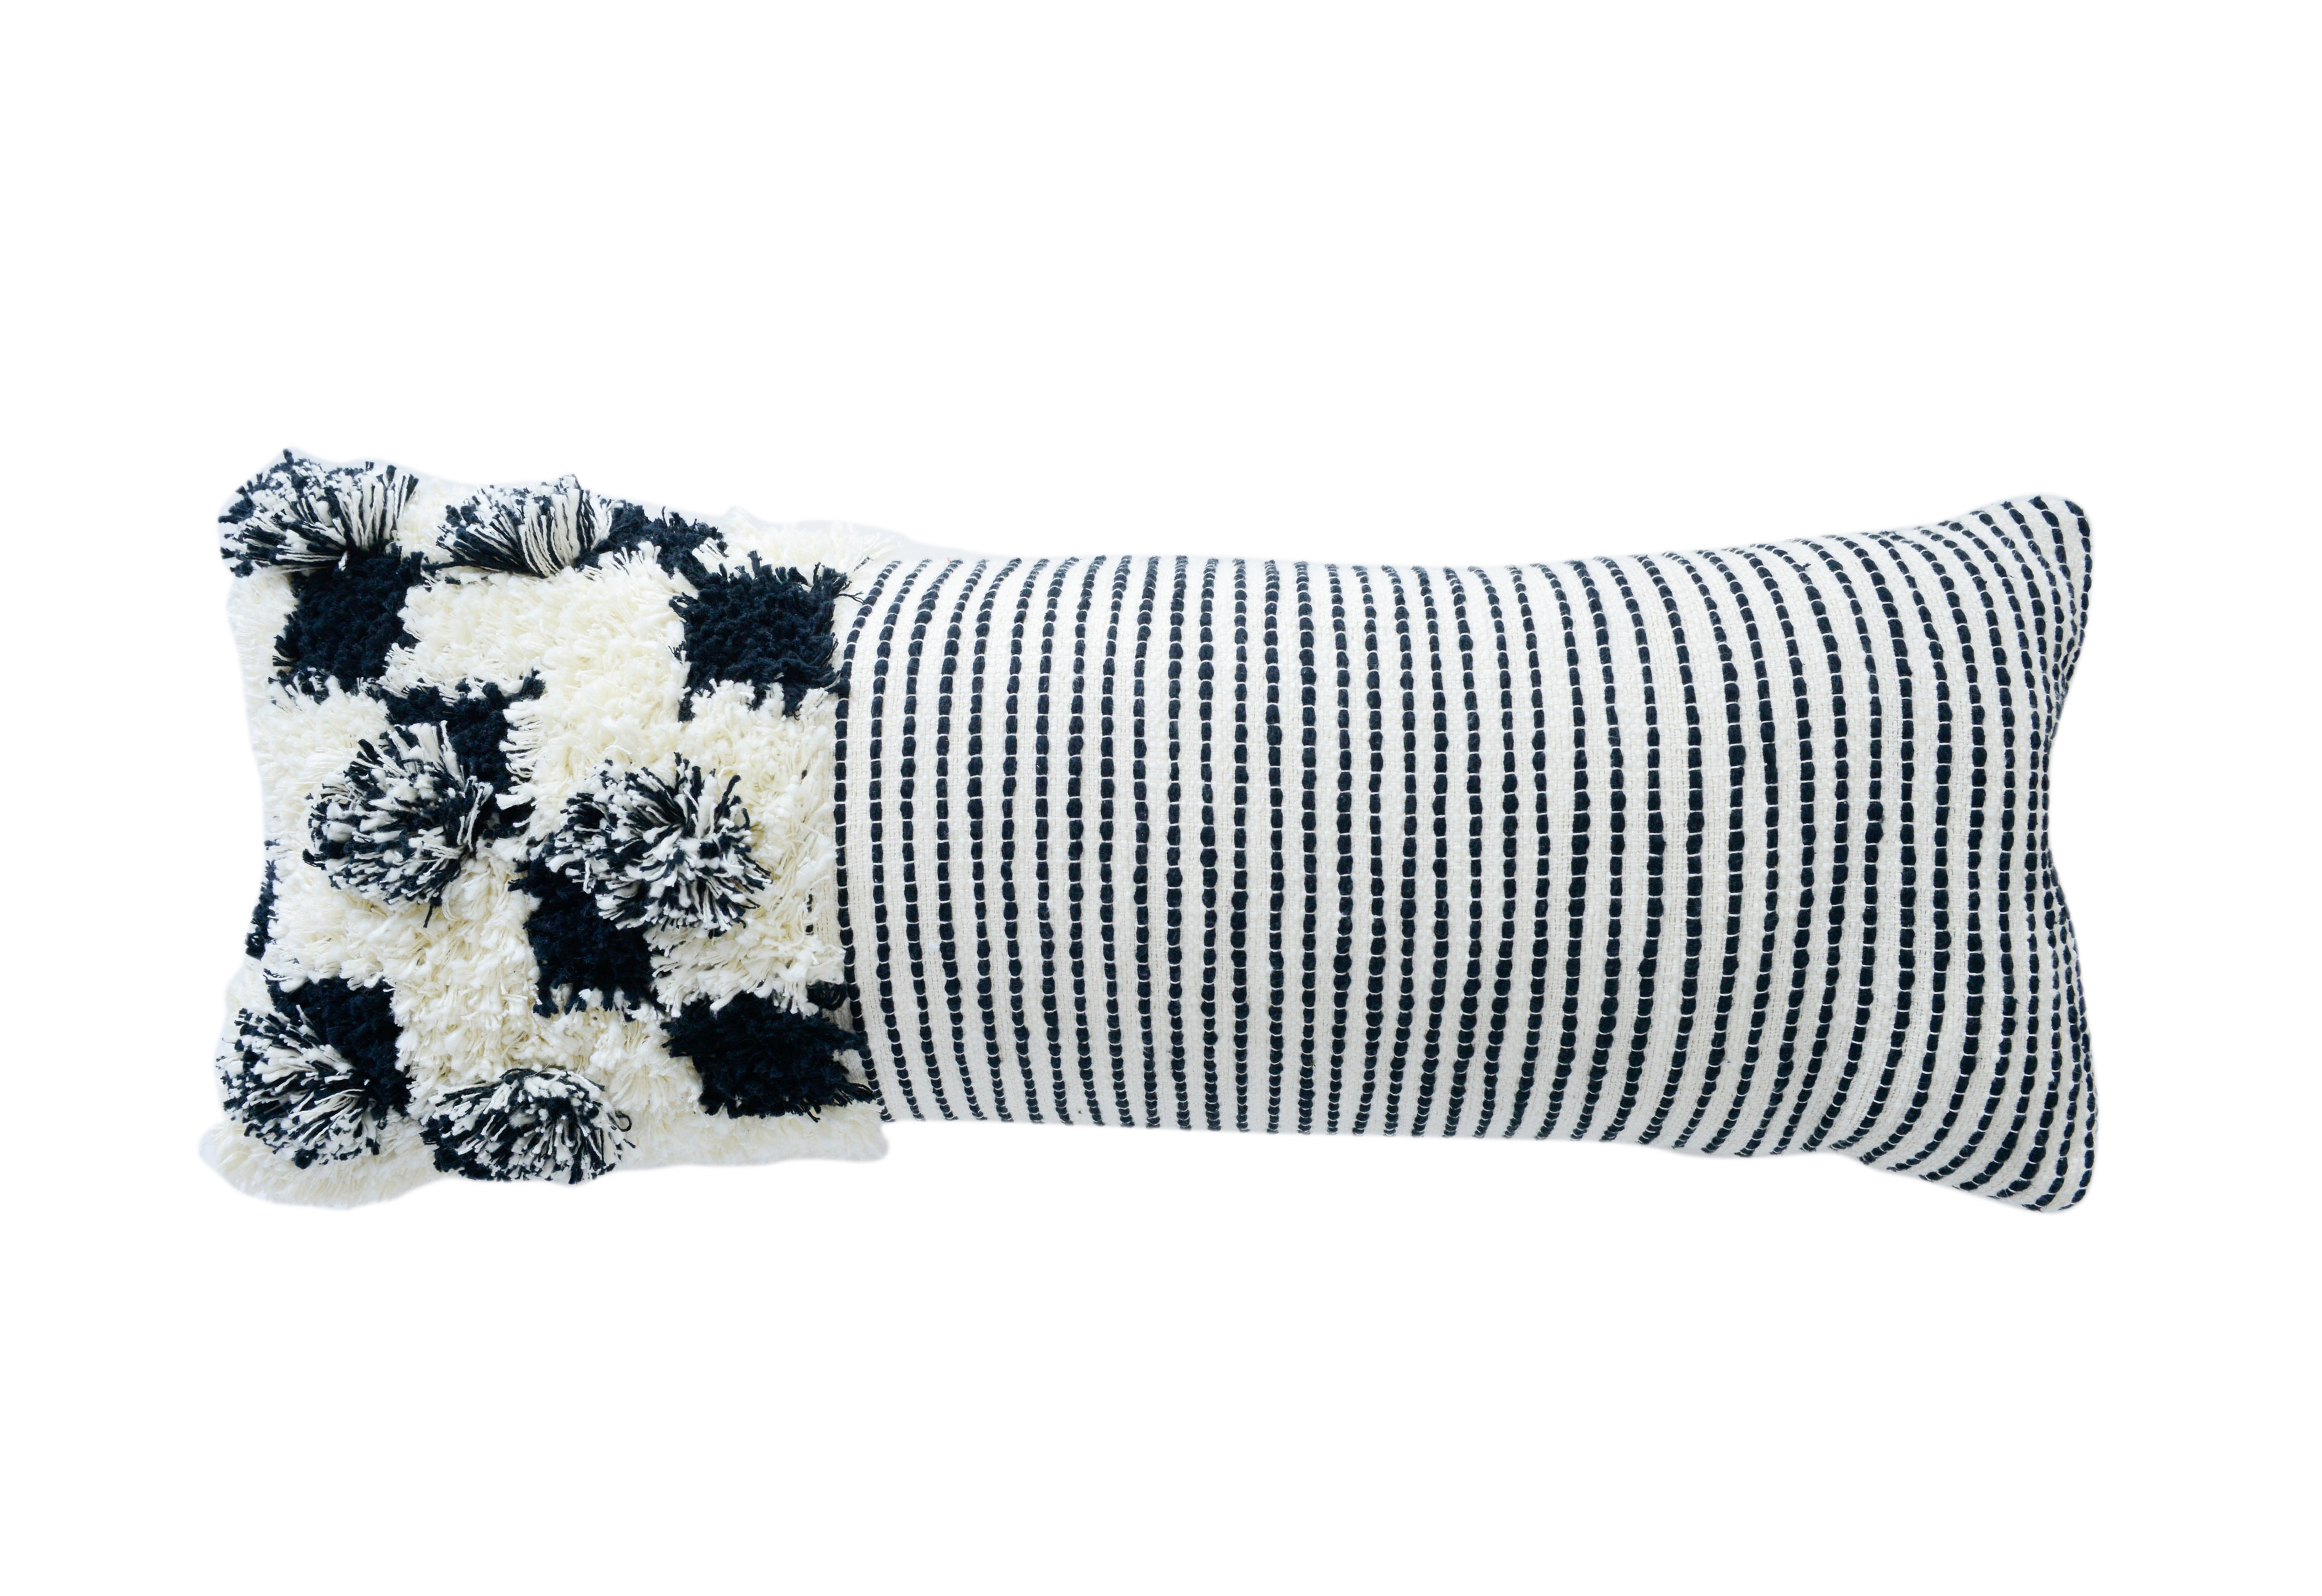 Embroidered & Appliqued Black & White Cotton Lumbar Pillow with Fringe - Moss & Wilder